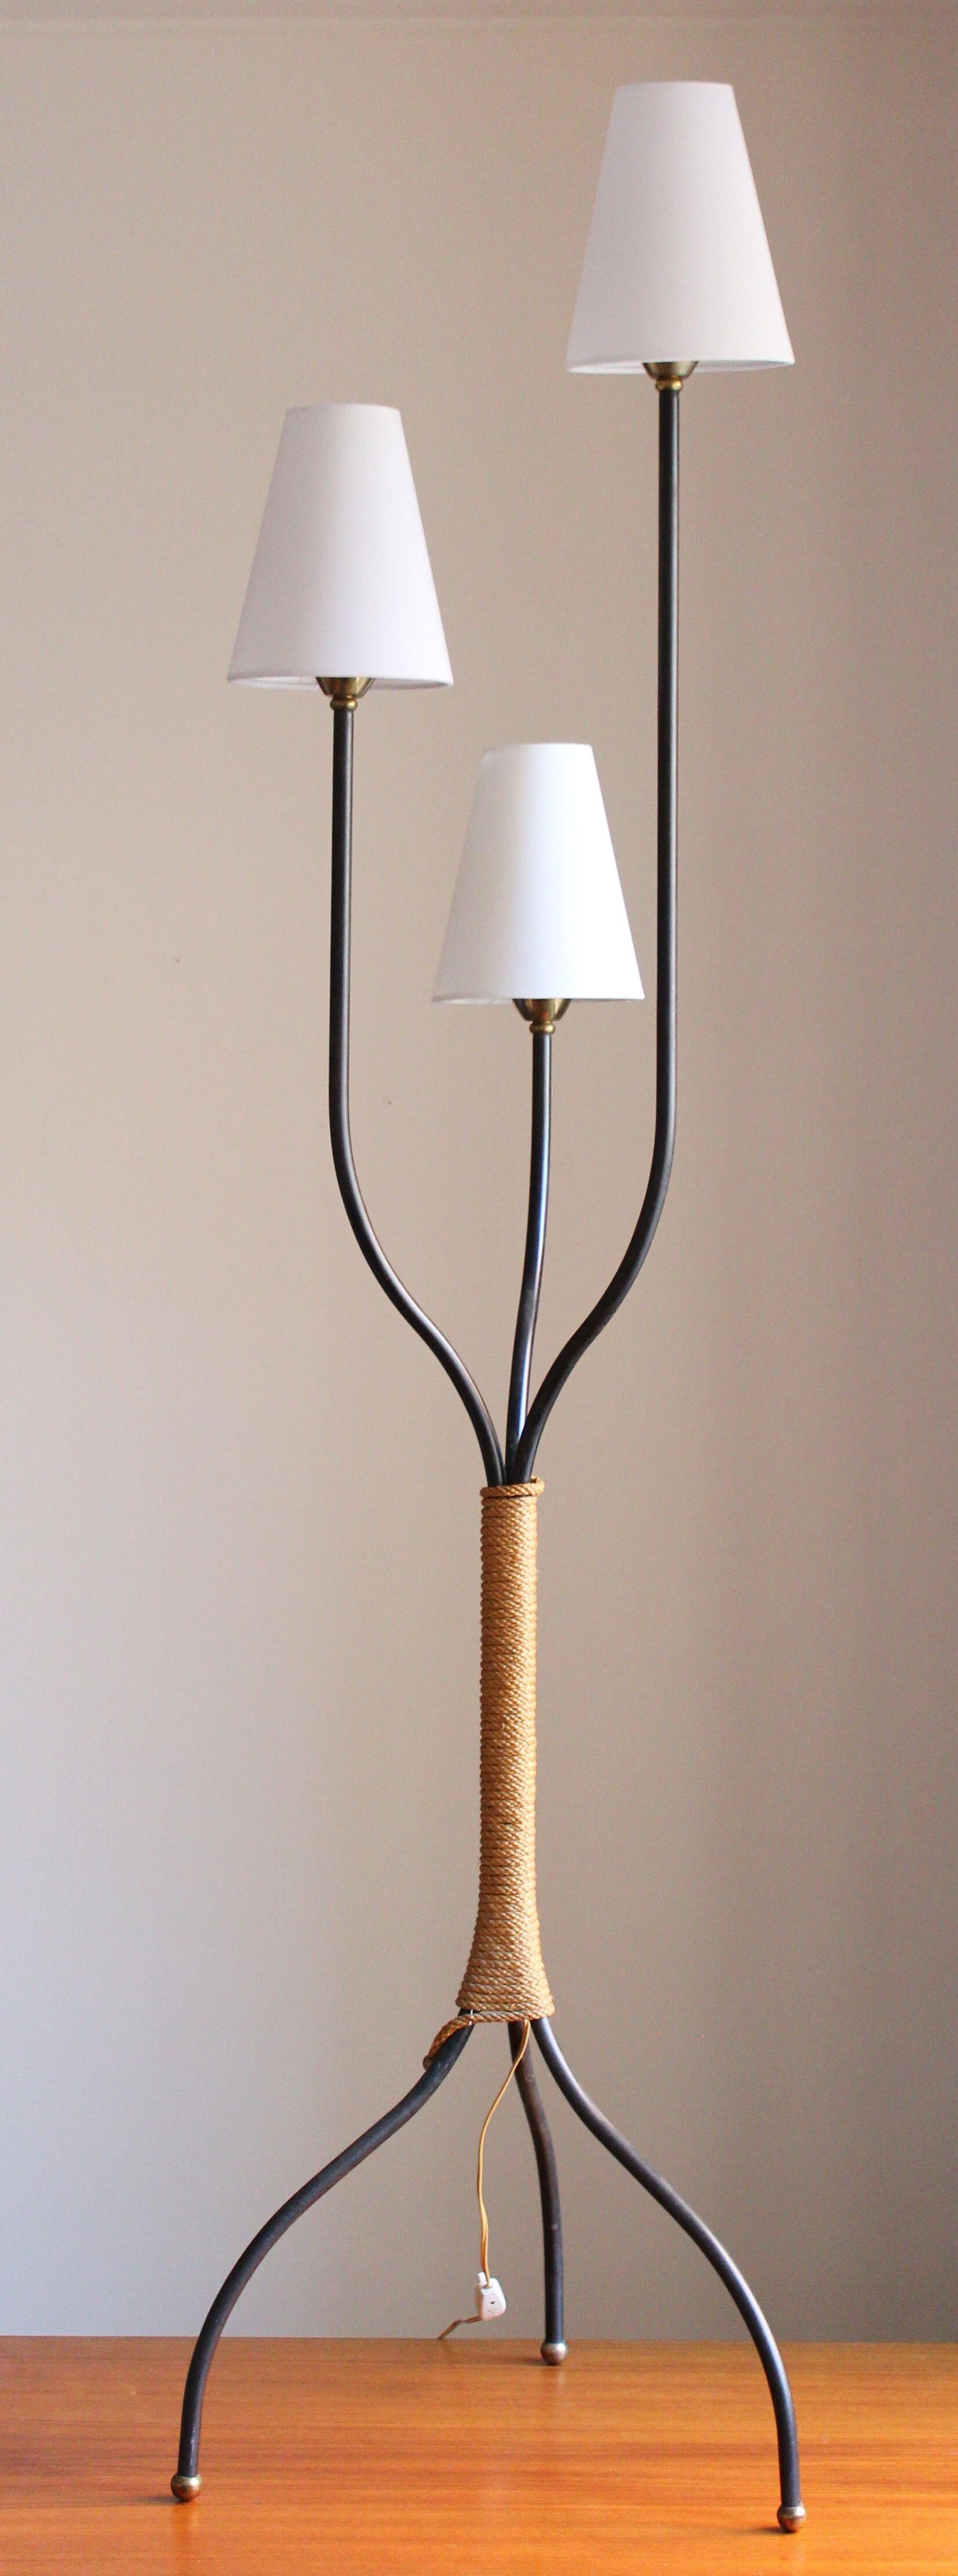 An organic floor lamp, in black lacquered metal, wrapped in cord with brass ends and brass feet. Designed and production attributed to J.T. Kalmar, Austria, 1950s.

With brand new high-end lampshades.

Other designers of the period include Paavo